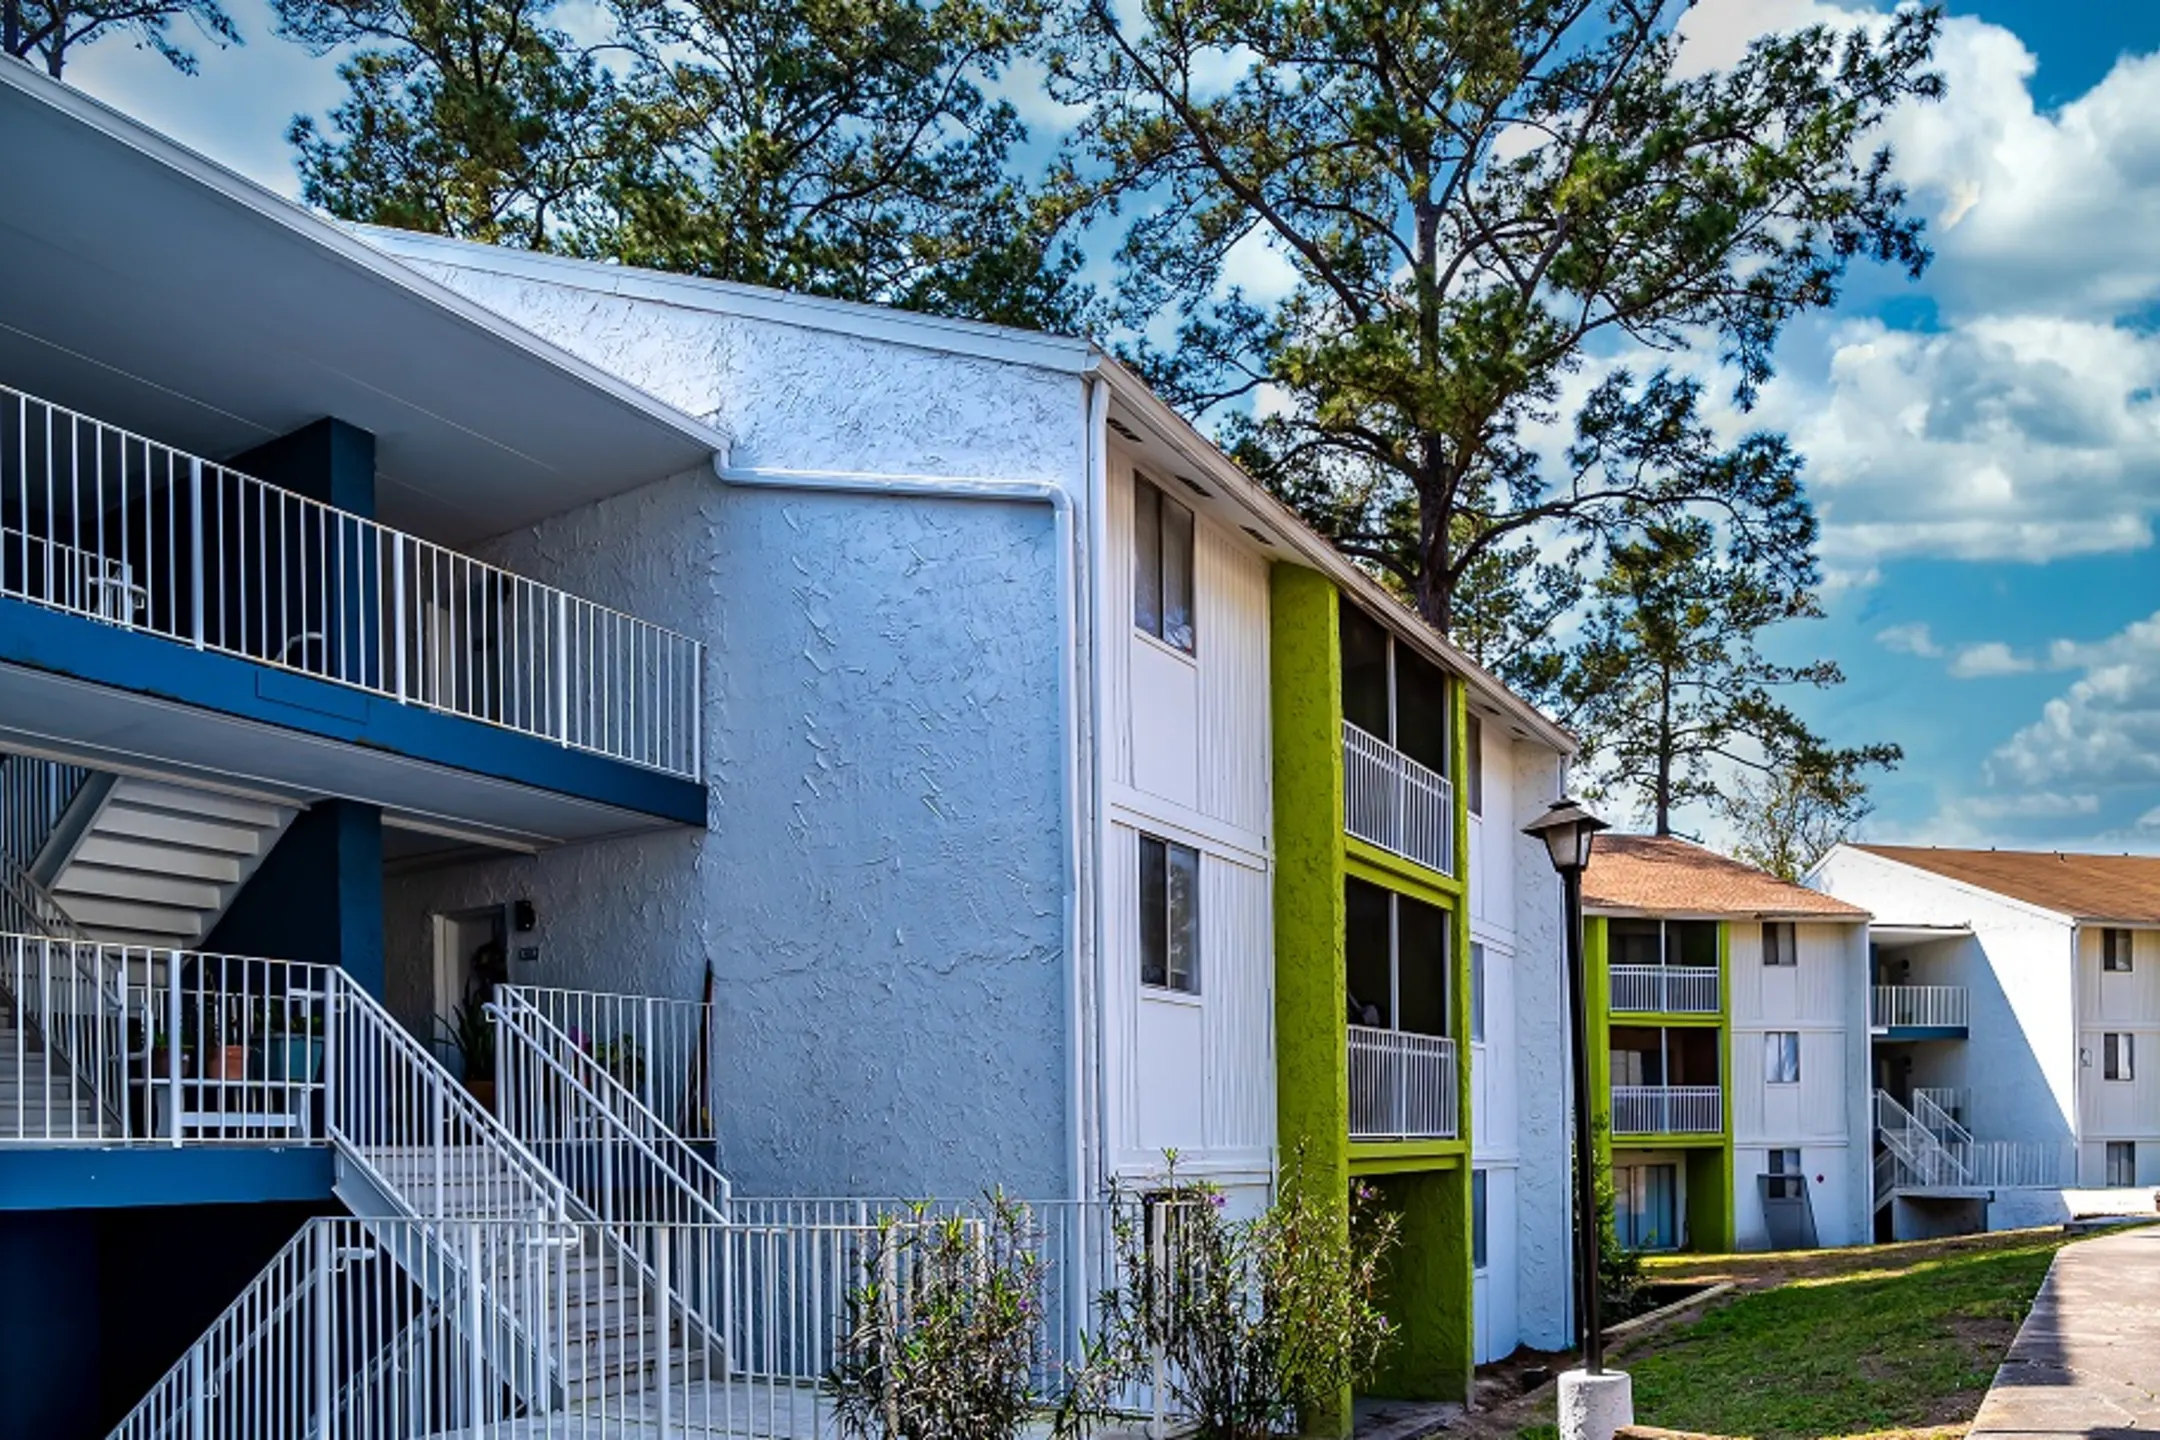 Building - Red Bay Apartments - Jacksonville, FL